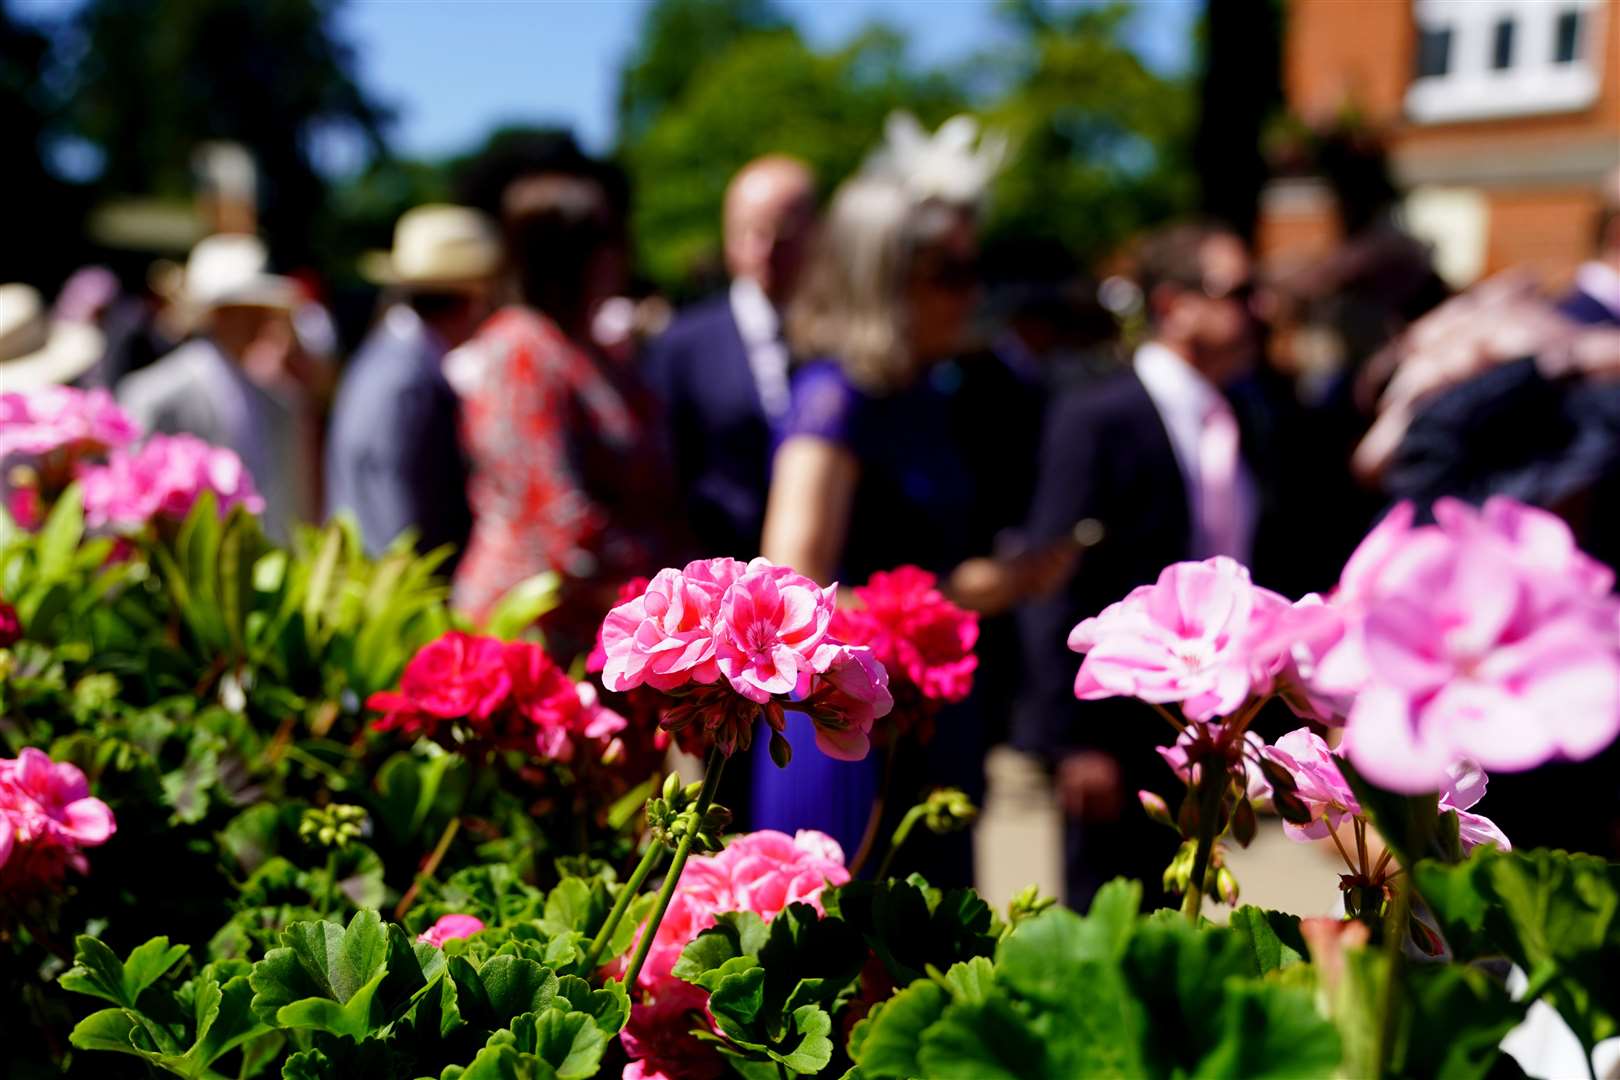 It was a beautiful sunny day for racegoers, with flowers in full bloom for the occasion (Adam Davy/PA)